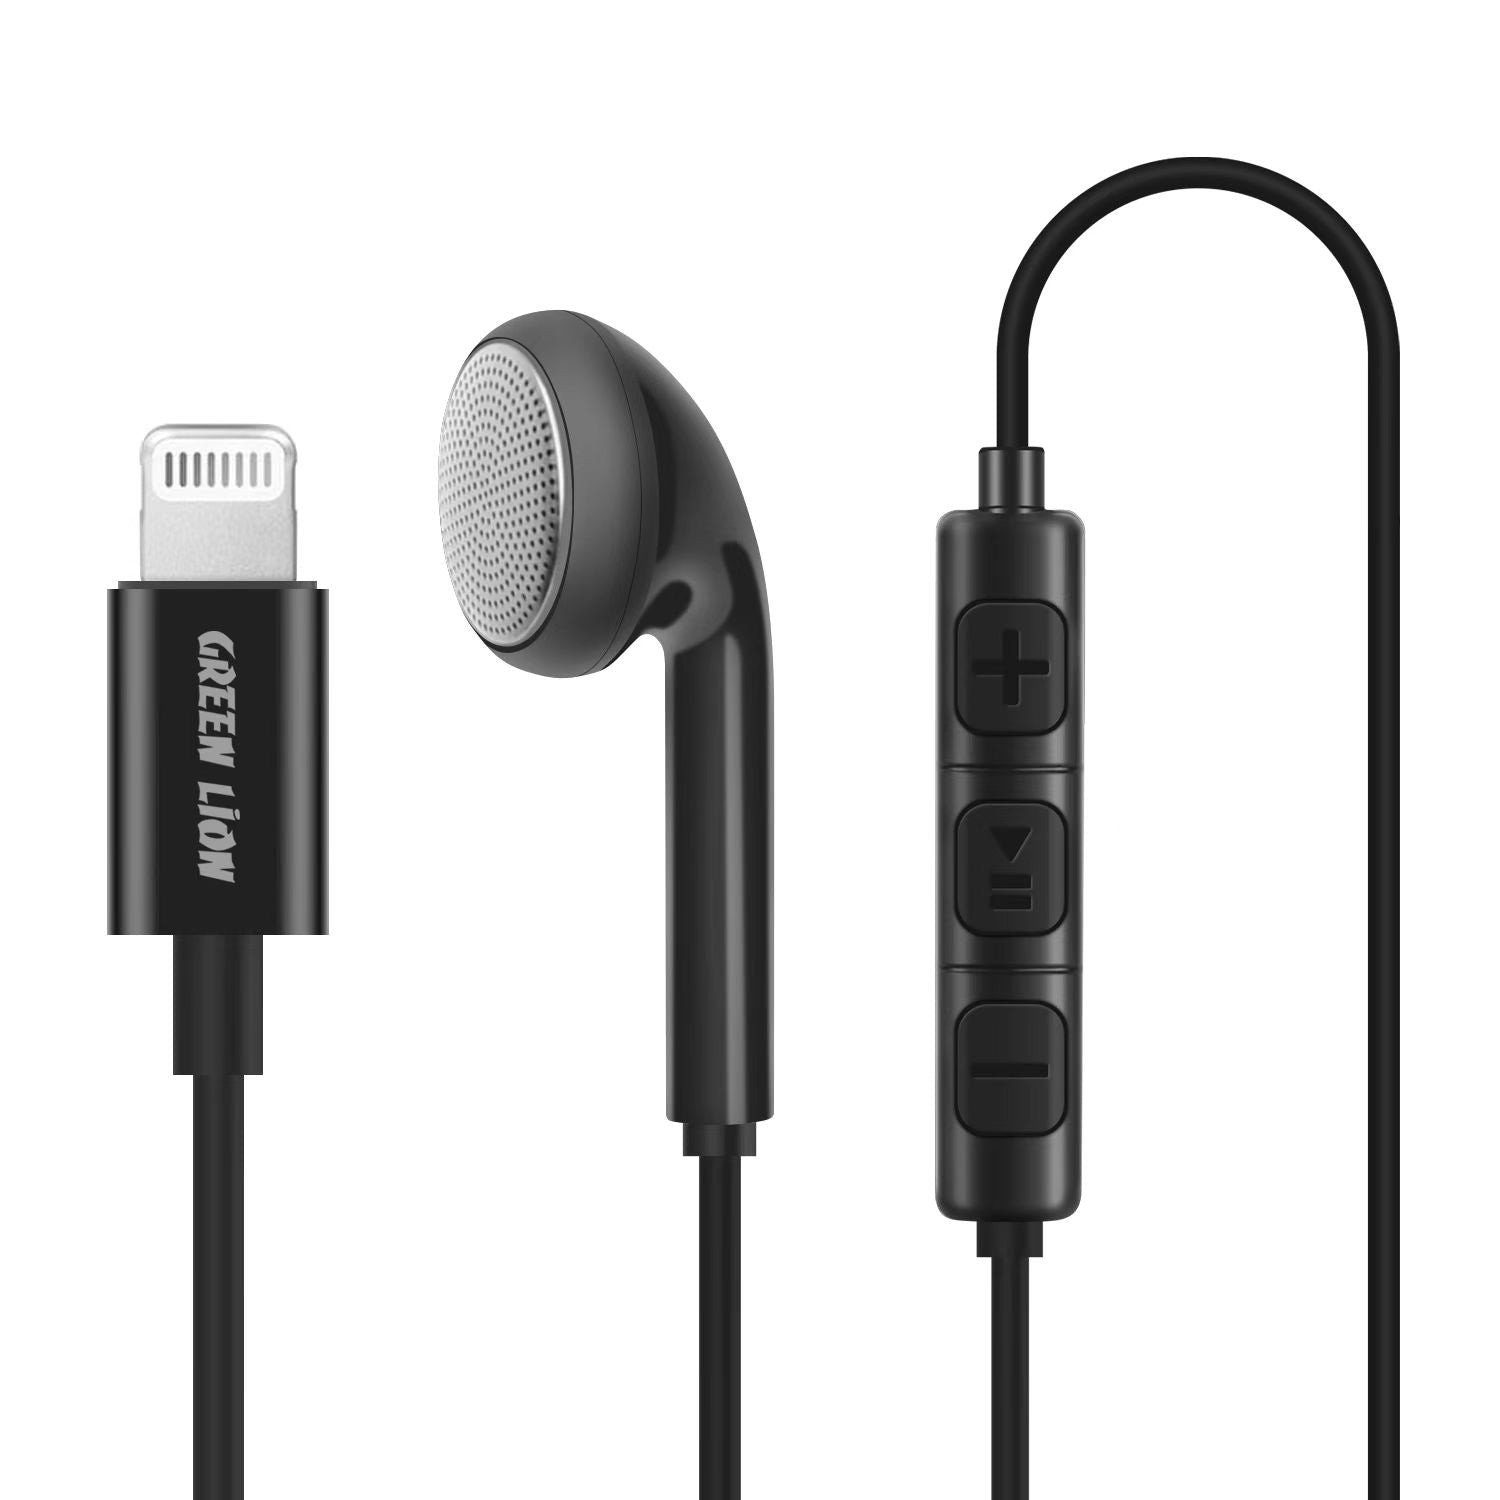 Green Lion MFI Mono Earphone with Lightning Connector